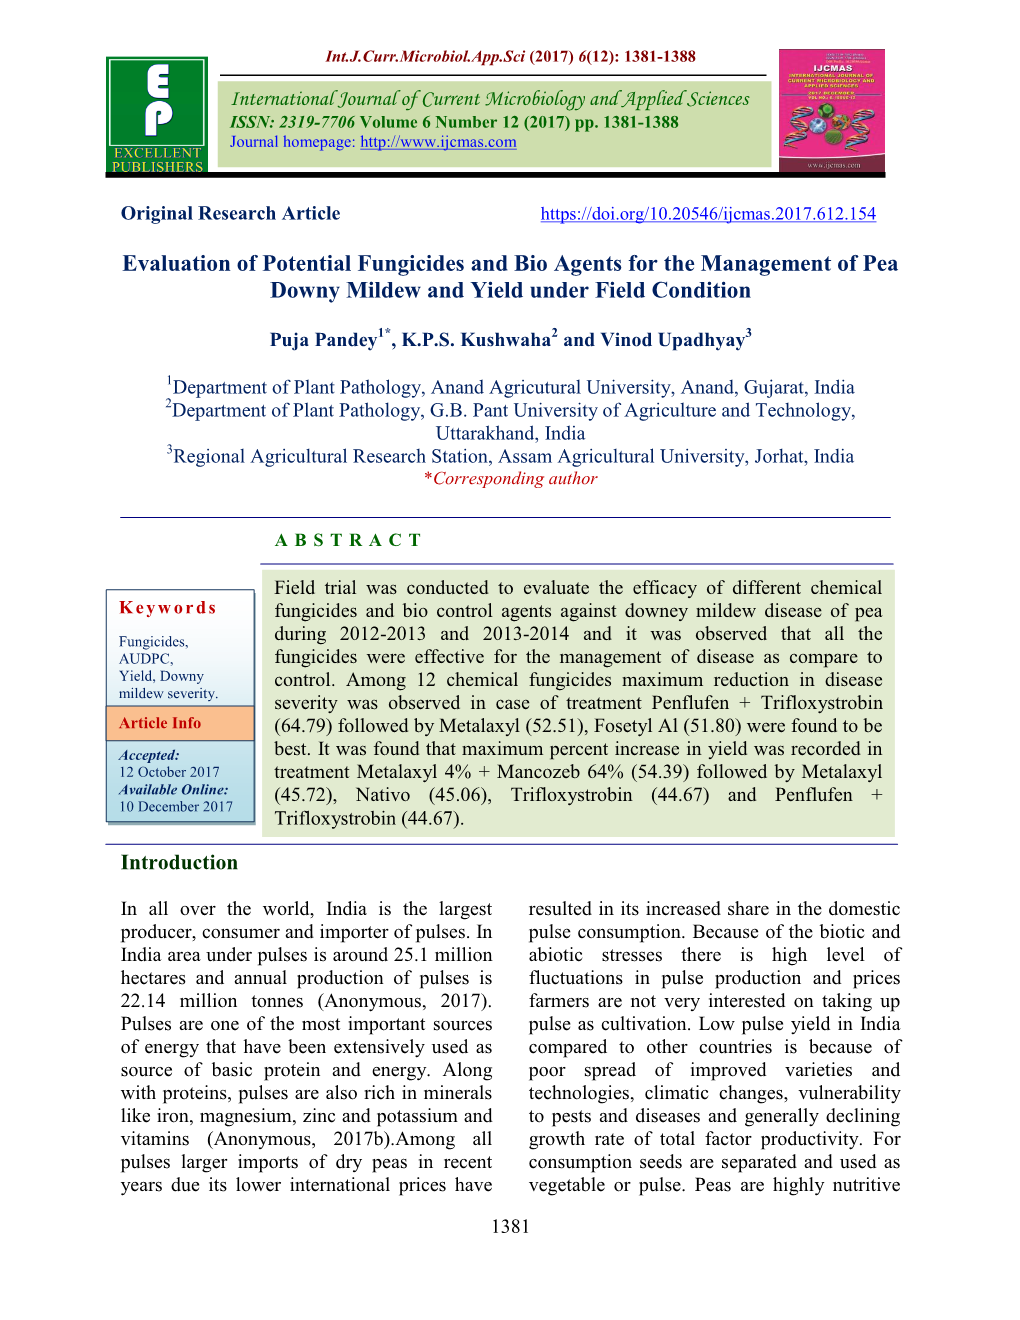 Evaluation of Potential Fungicides and Bio Agents for the Management of Pea Downy Mildew and Yield Under Field Condition